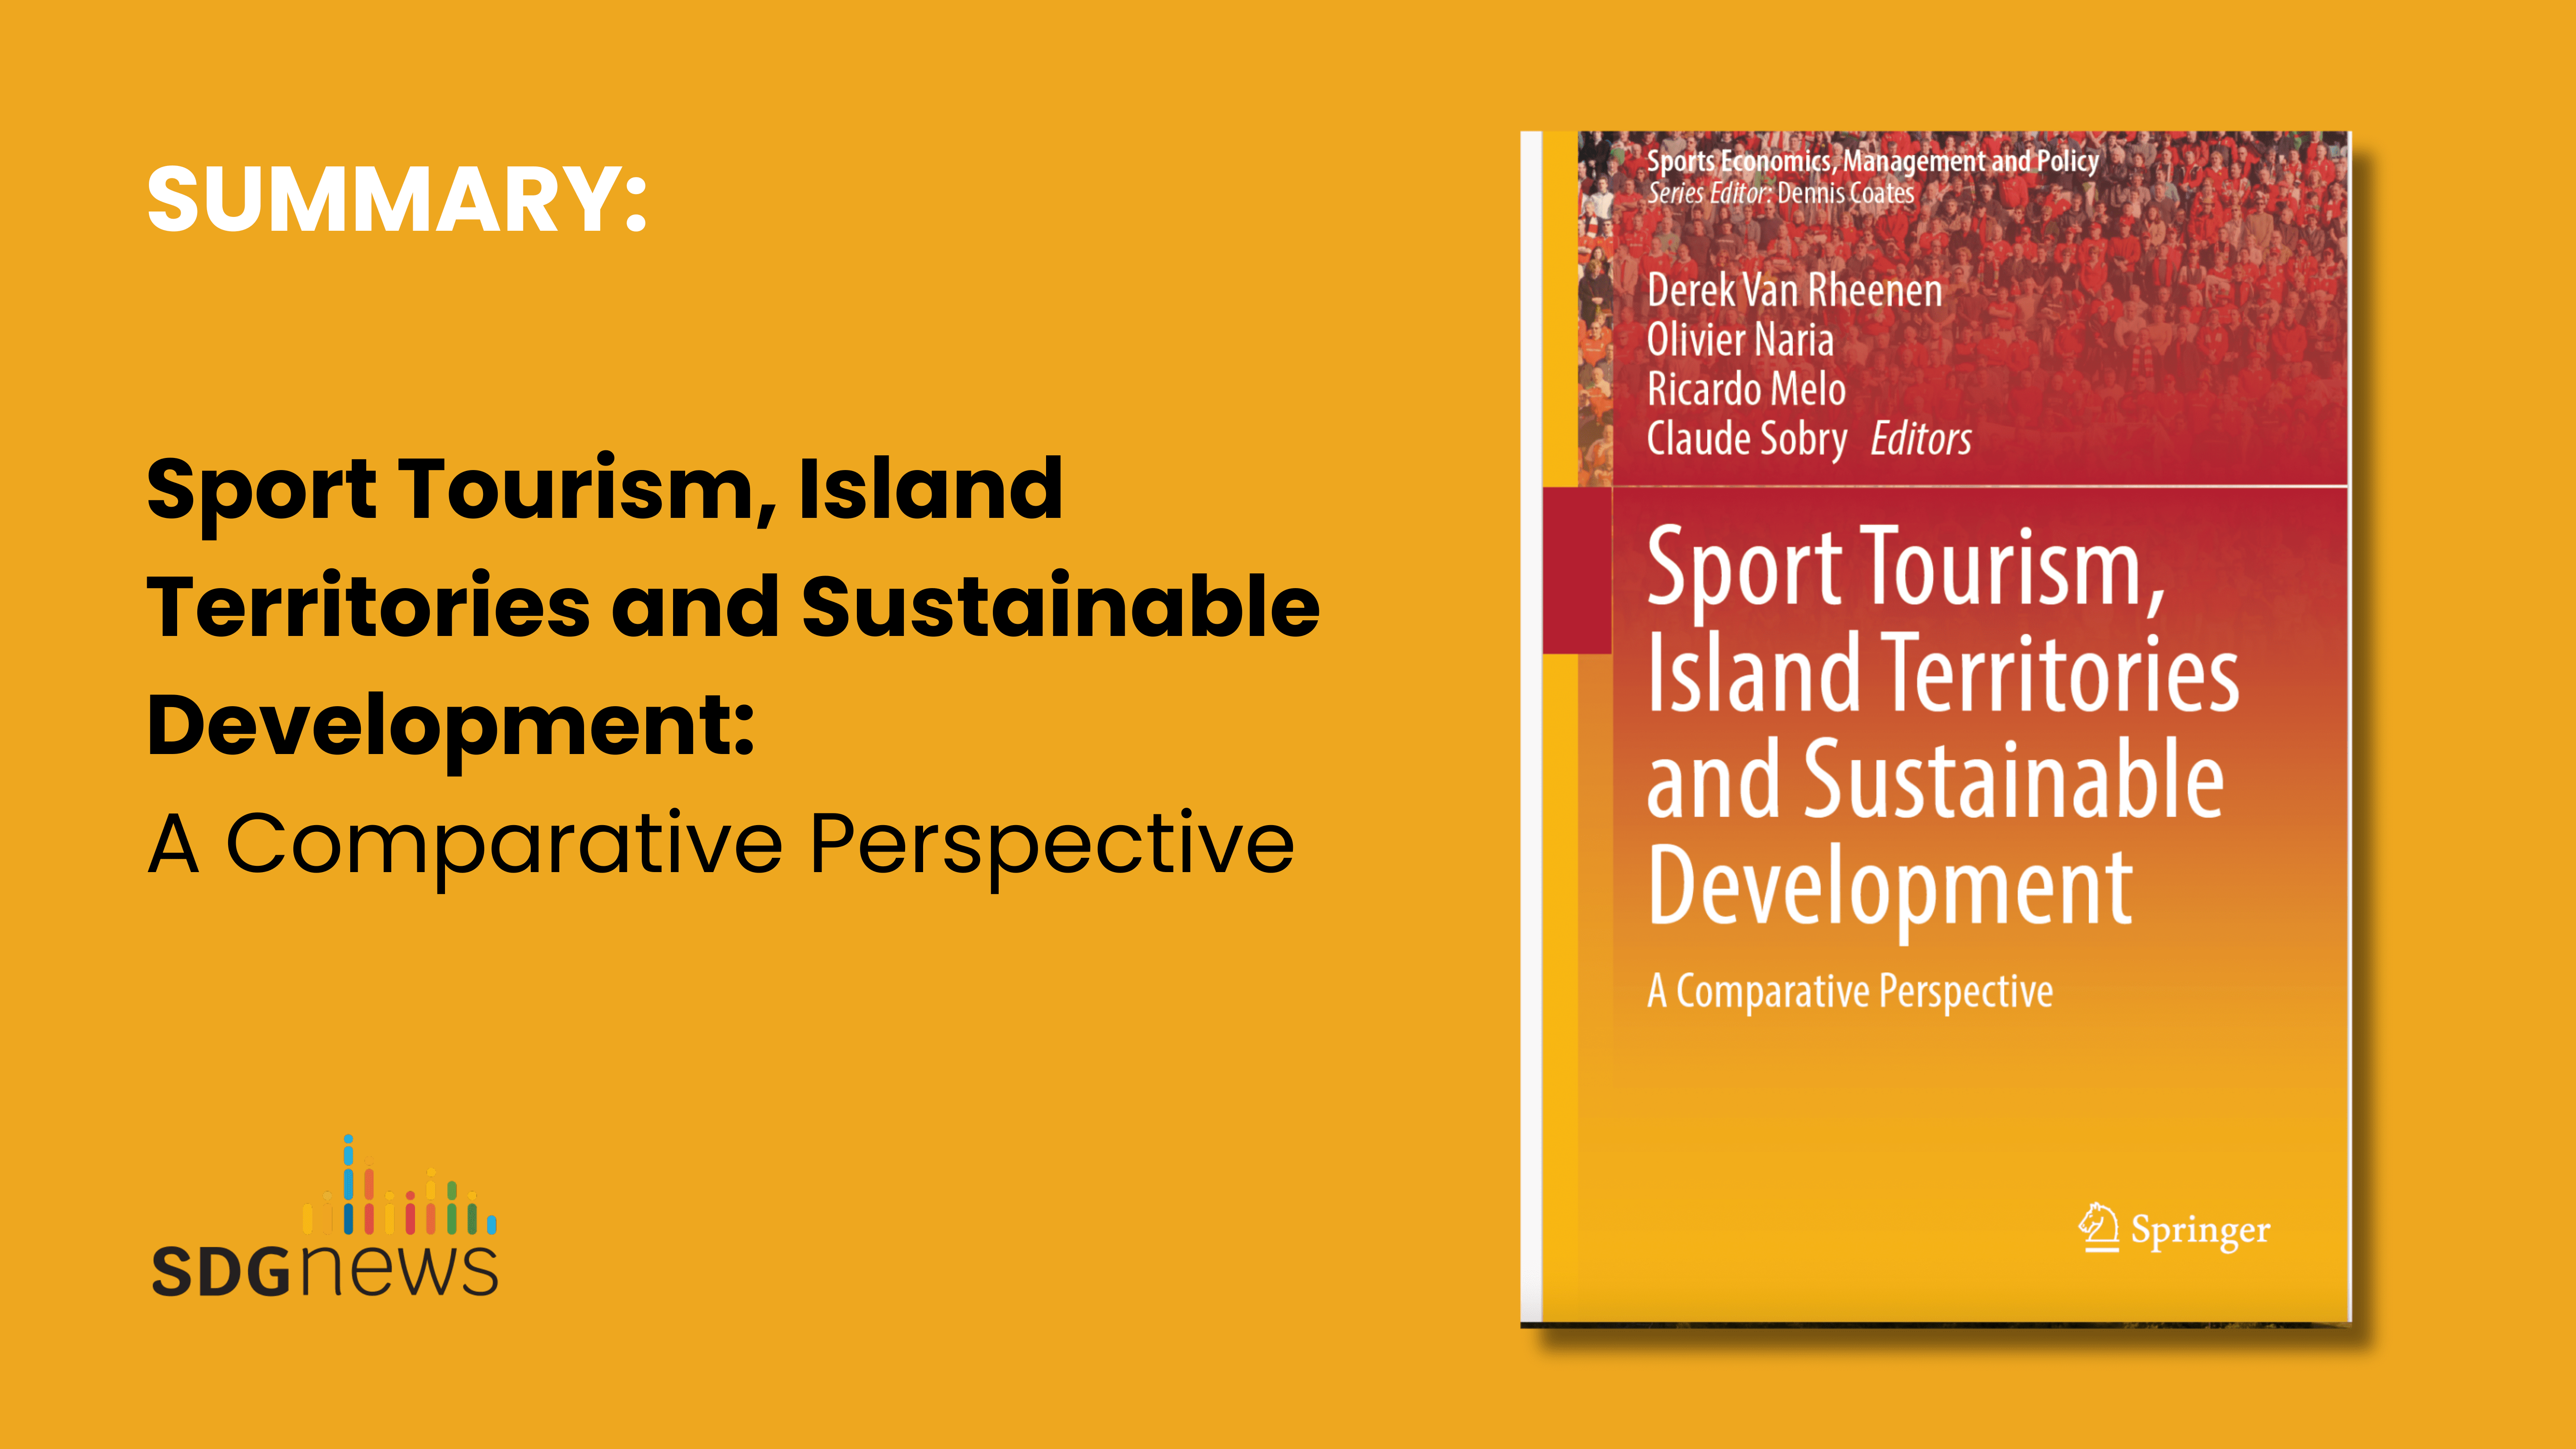 Sport Tourism, Island Territories and Sustainable Development- A Comparative Perspective SUMMARY